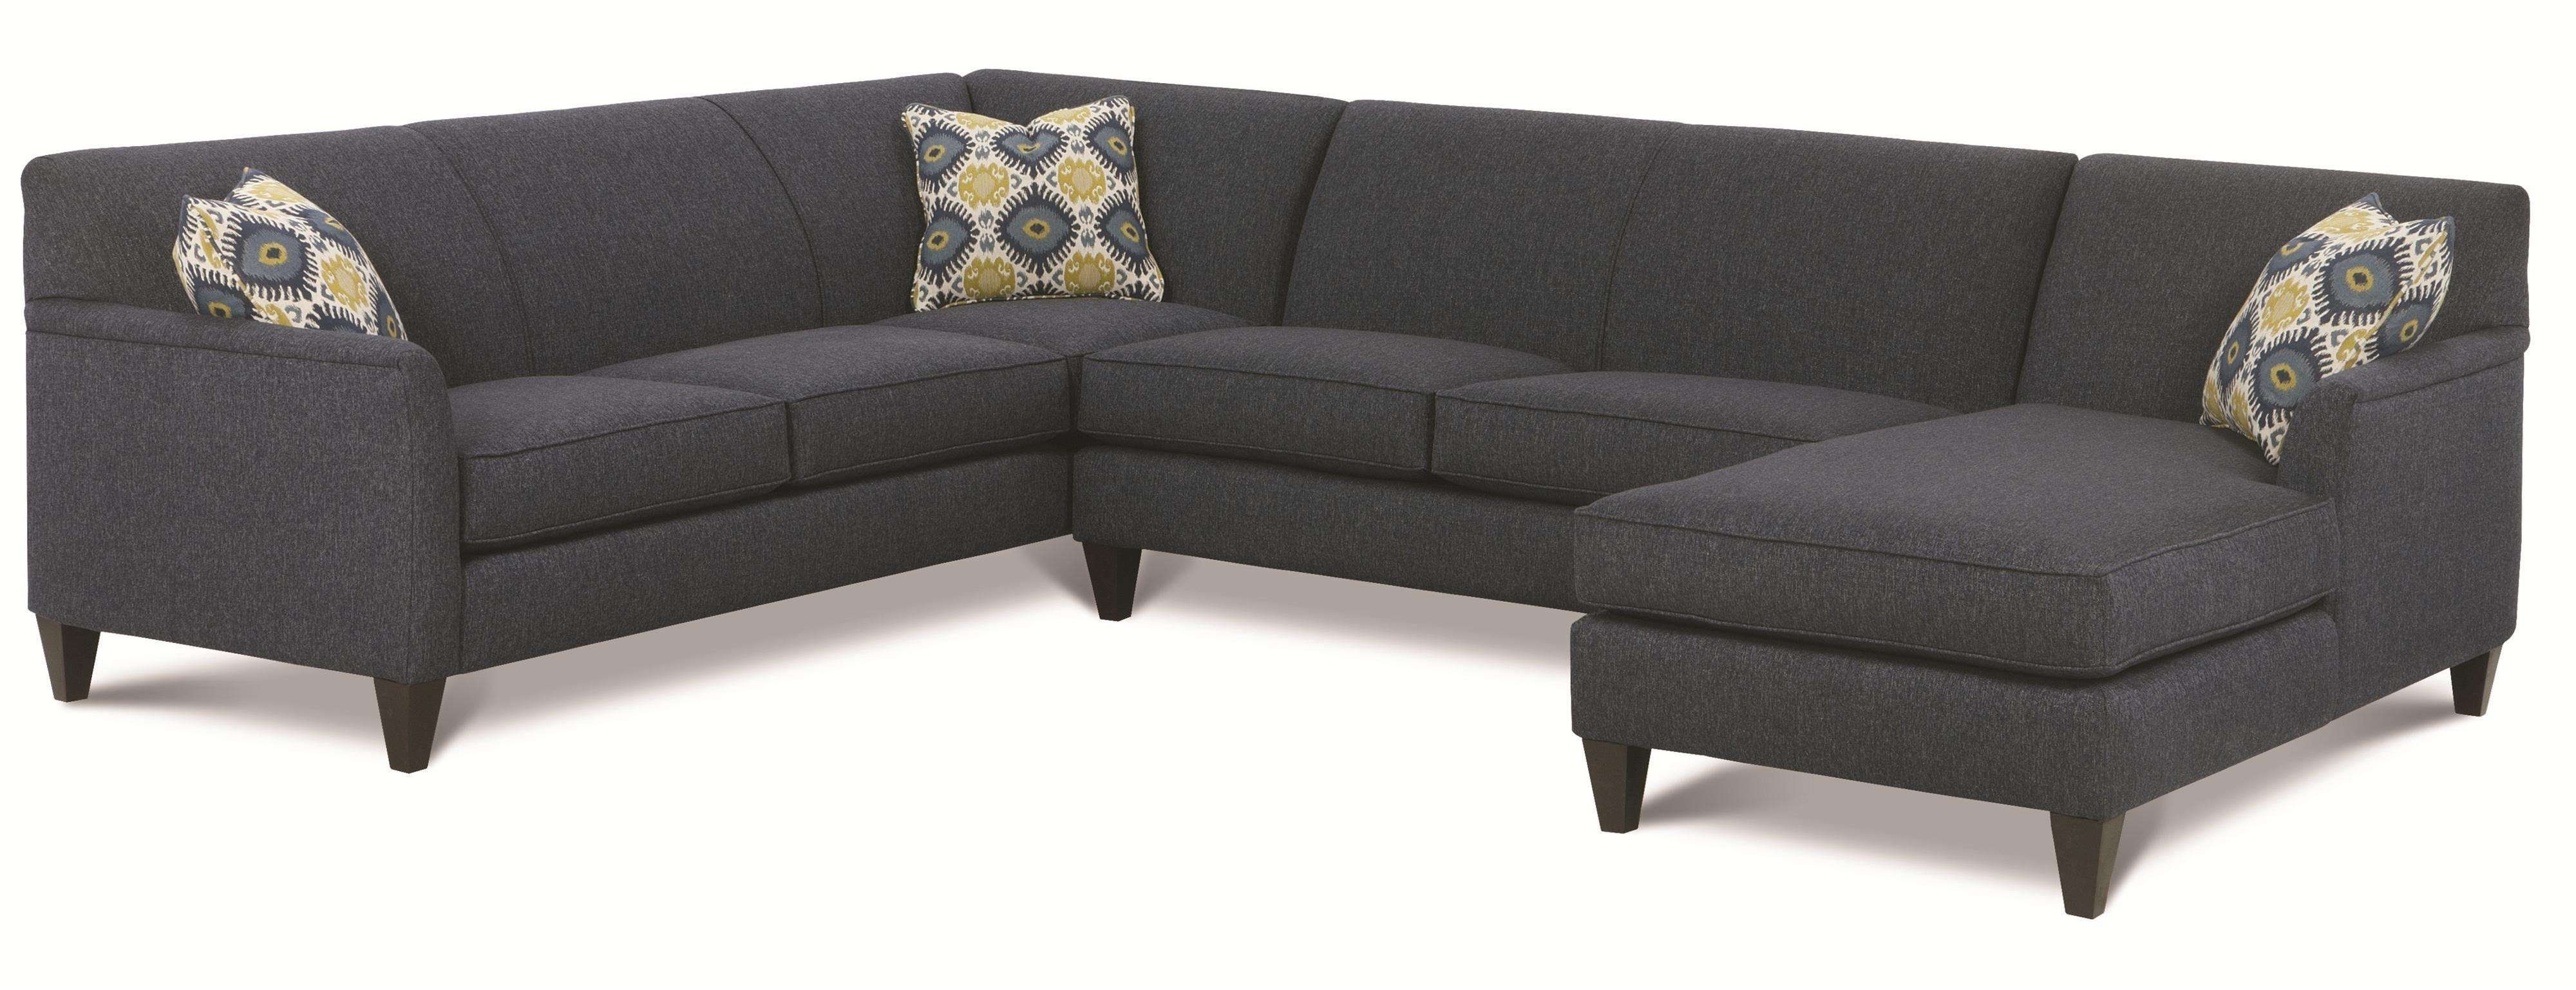 Simple 25 2 Piece Sectionals With Chaise Awesome | Russiandesignshow With Aquarius Dark Grey 2 Piece Sectionals With Laf Chaise (View 10 of 25)